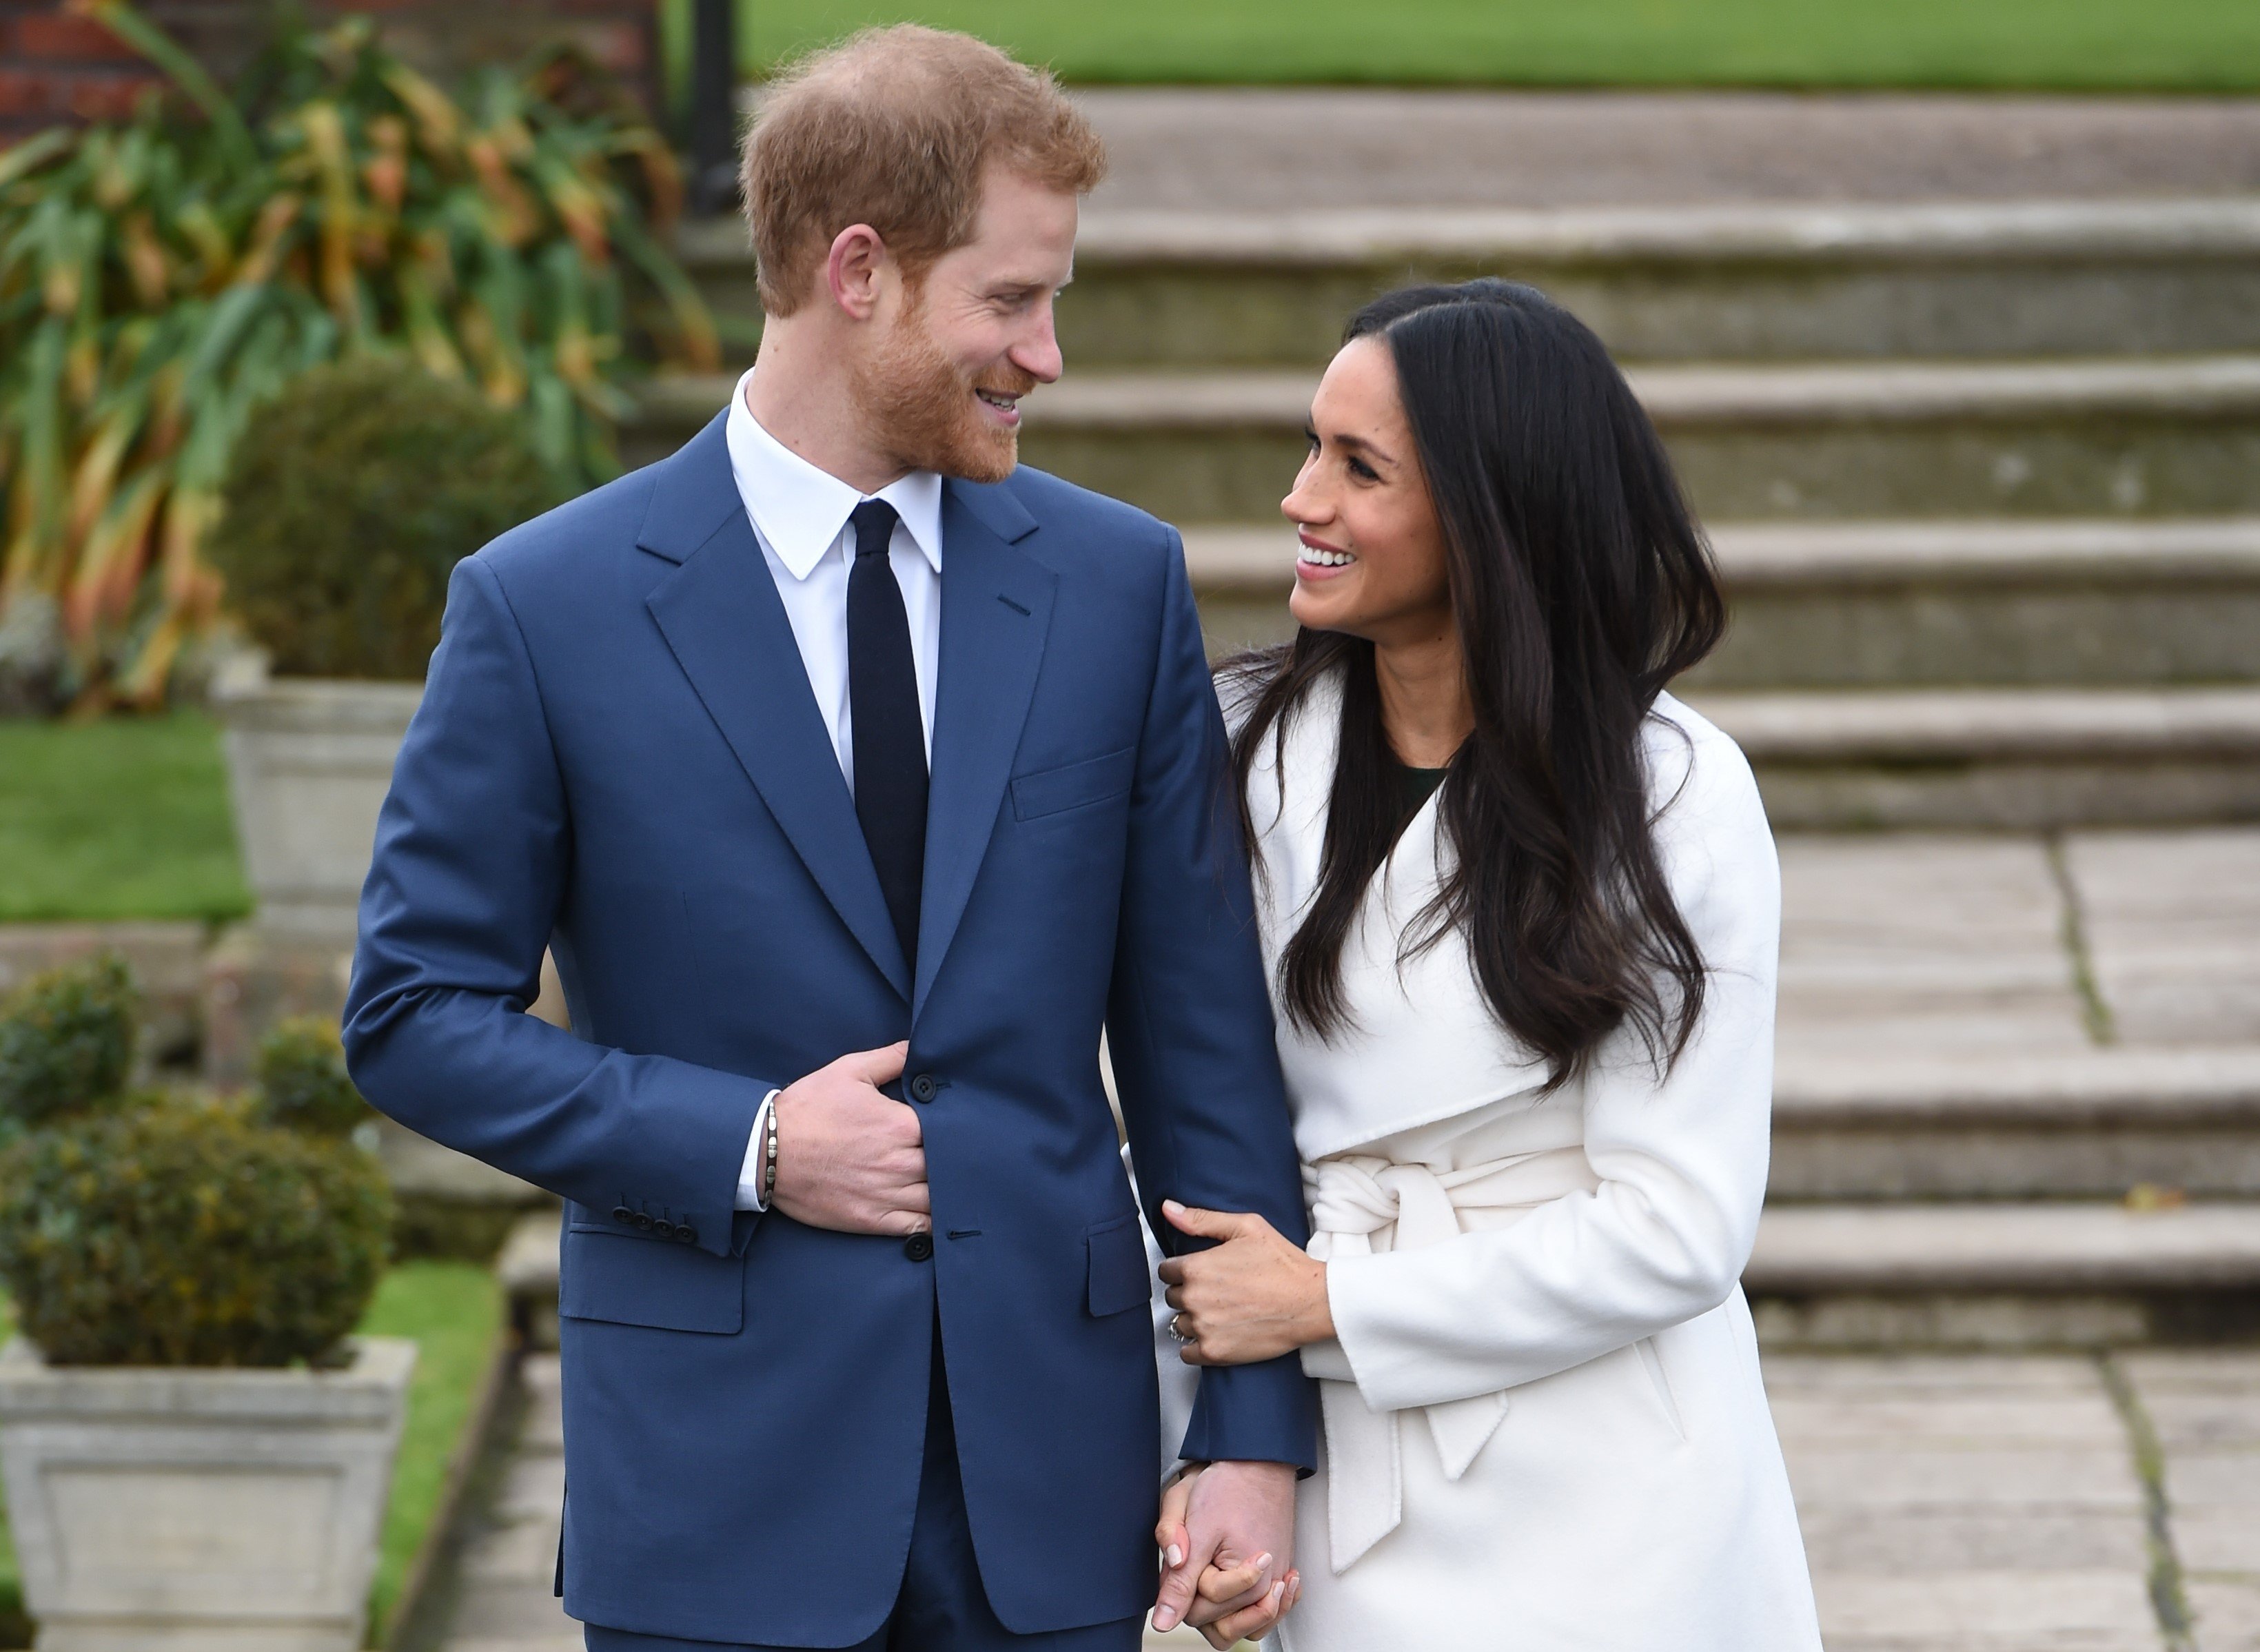 The Reason Meghan Markle and Prince Harry Always Hold Hands in Public, According to Body Language Expert